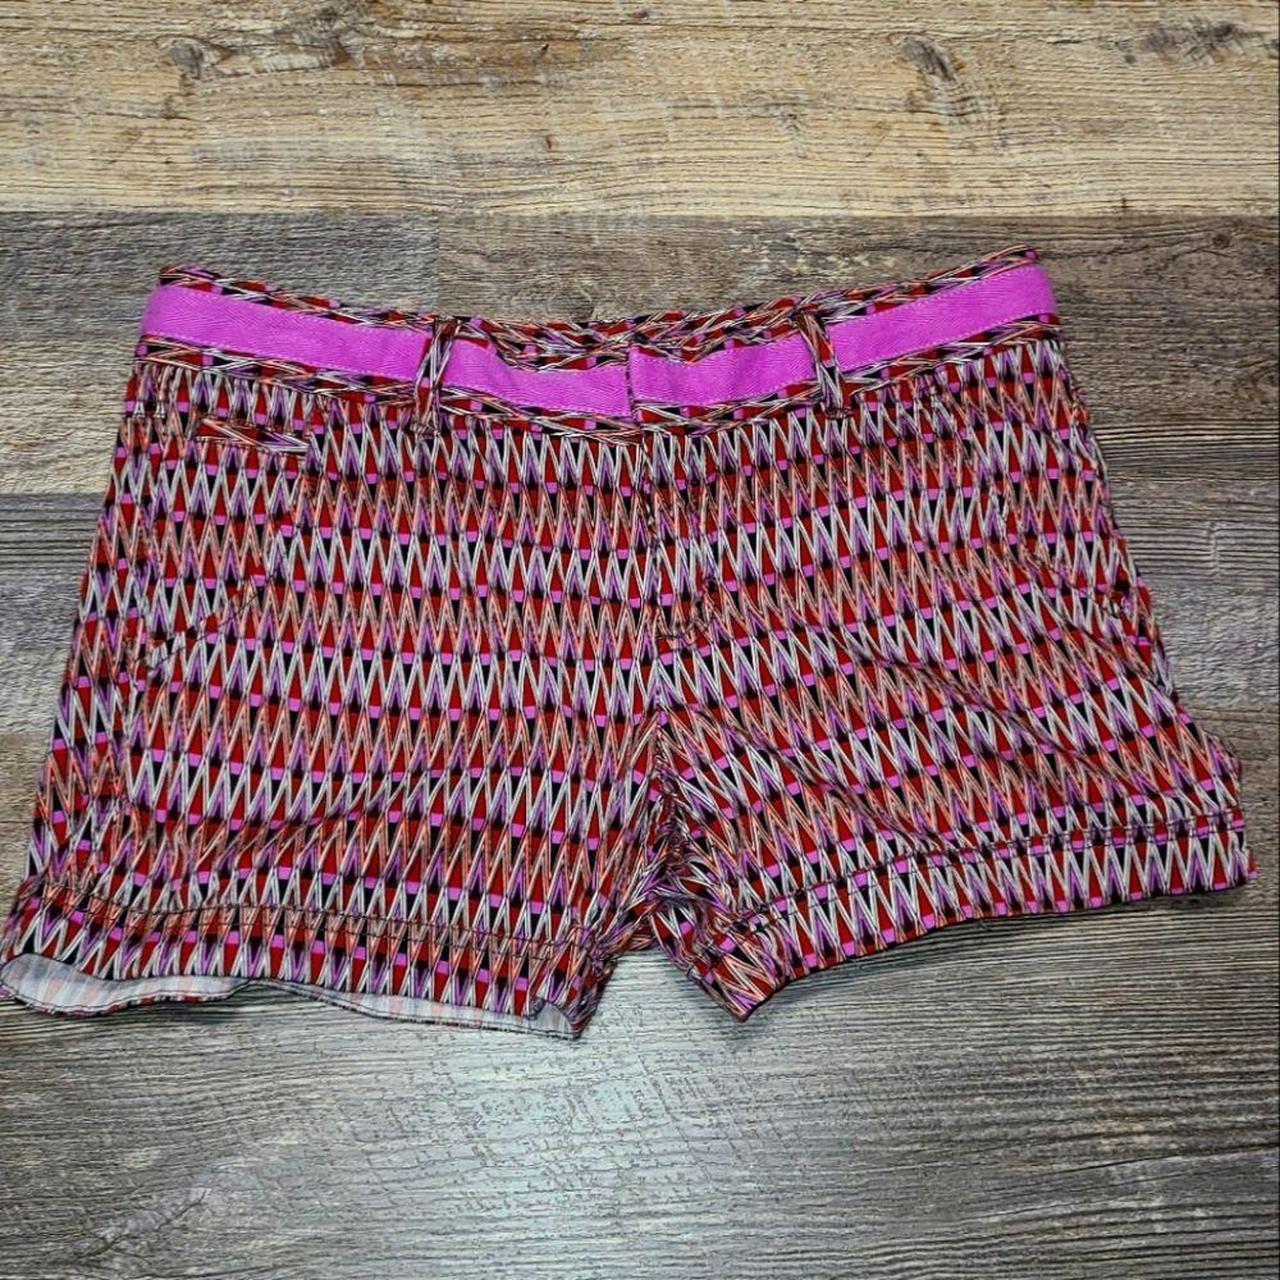 Athleta shorts in a size 6. pretty purple print with... - Depop